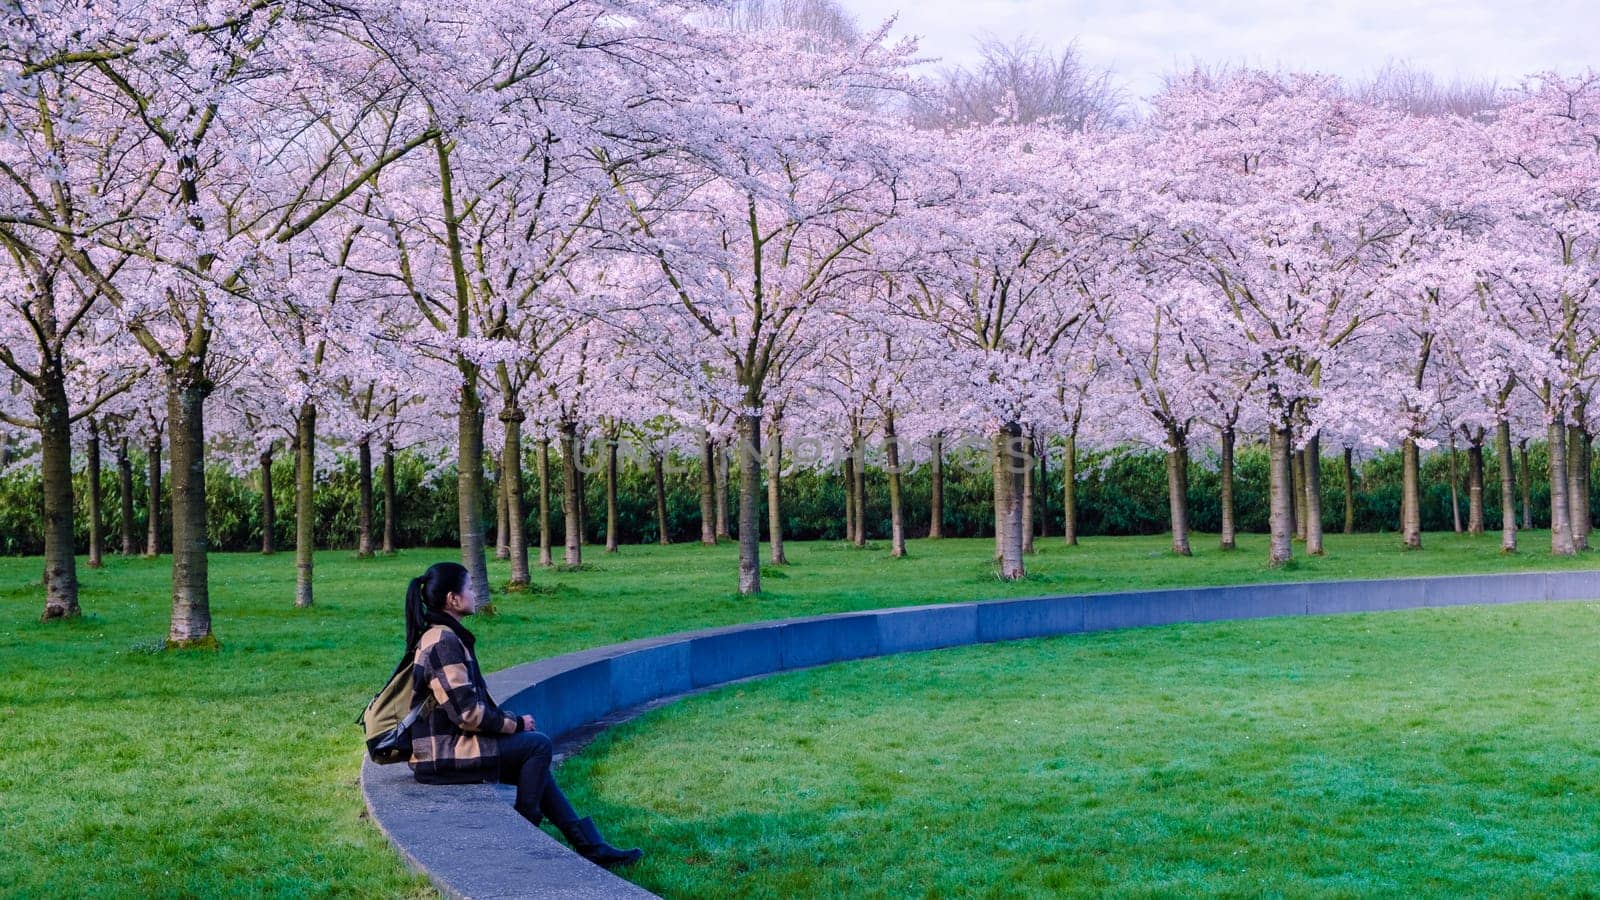 Kersenbloesempark Flower Park There are 400 cherry trees in Amsterdamse Bos, In the spring you can enjoy the beautiful cherry blossom or Sakura. Netherlands, a woman sitting lonely in the park